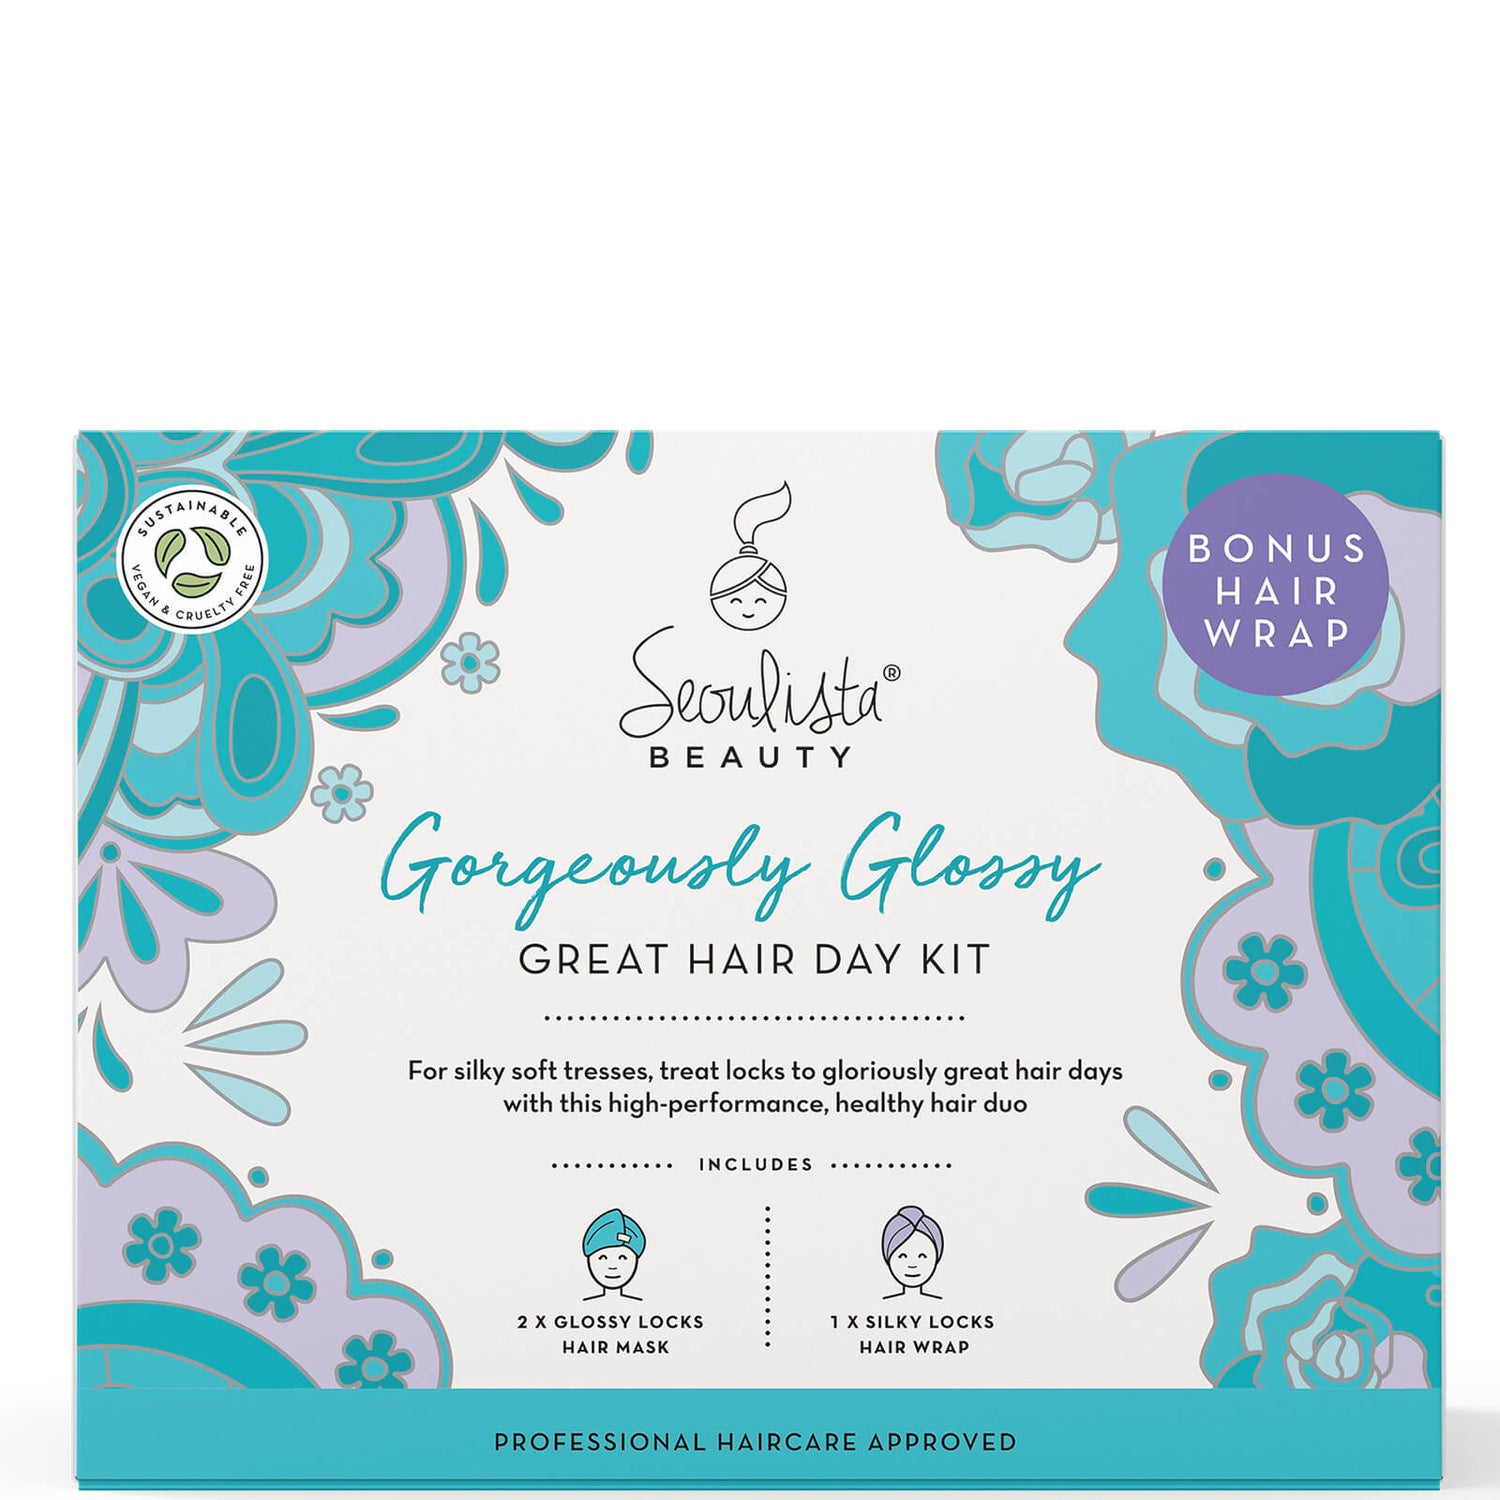 Seoulista Beauty Gorgeously Glossy Great Hair Day Kit (Worth £35.00)